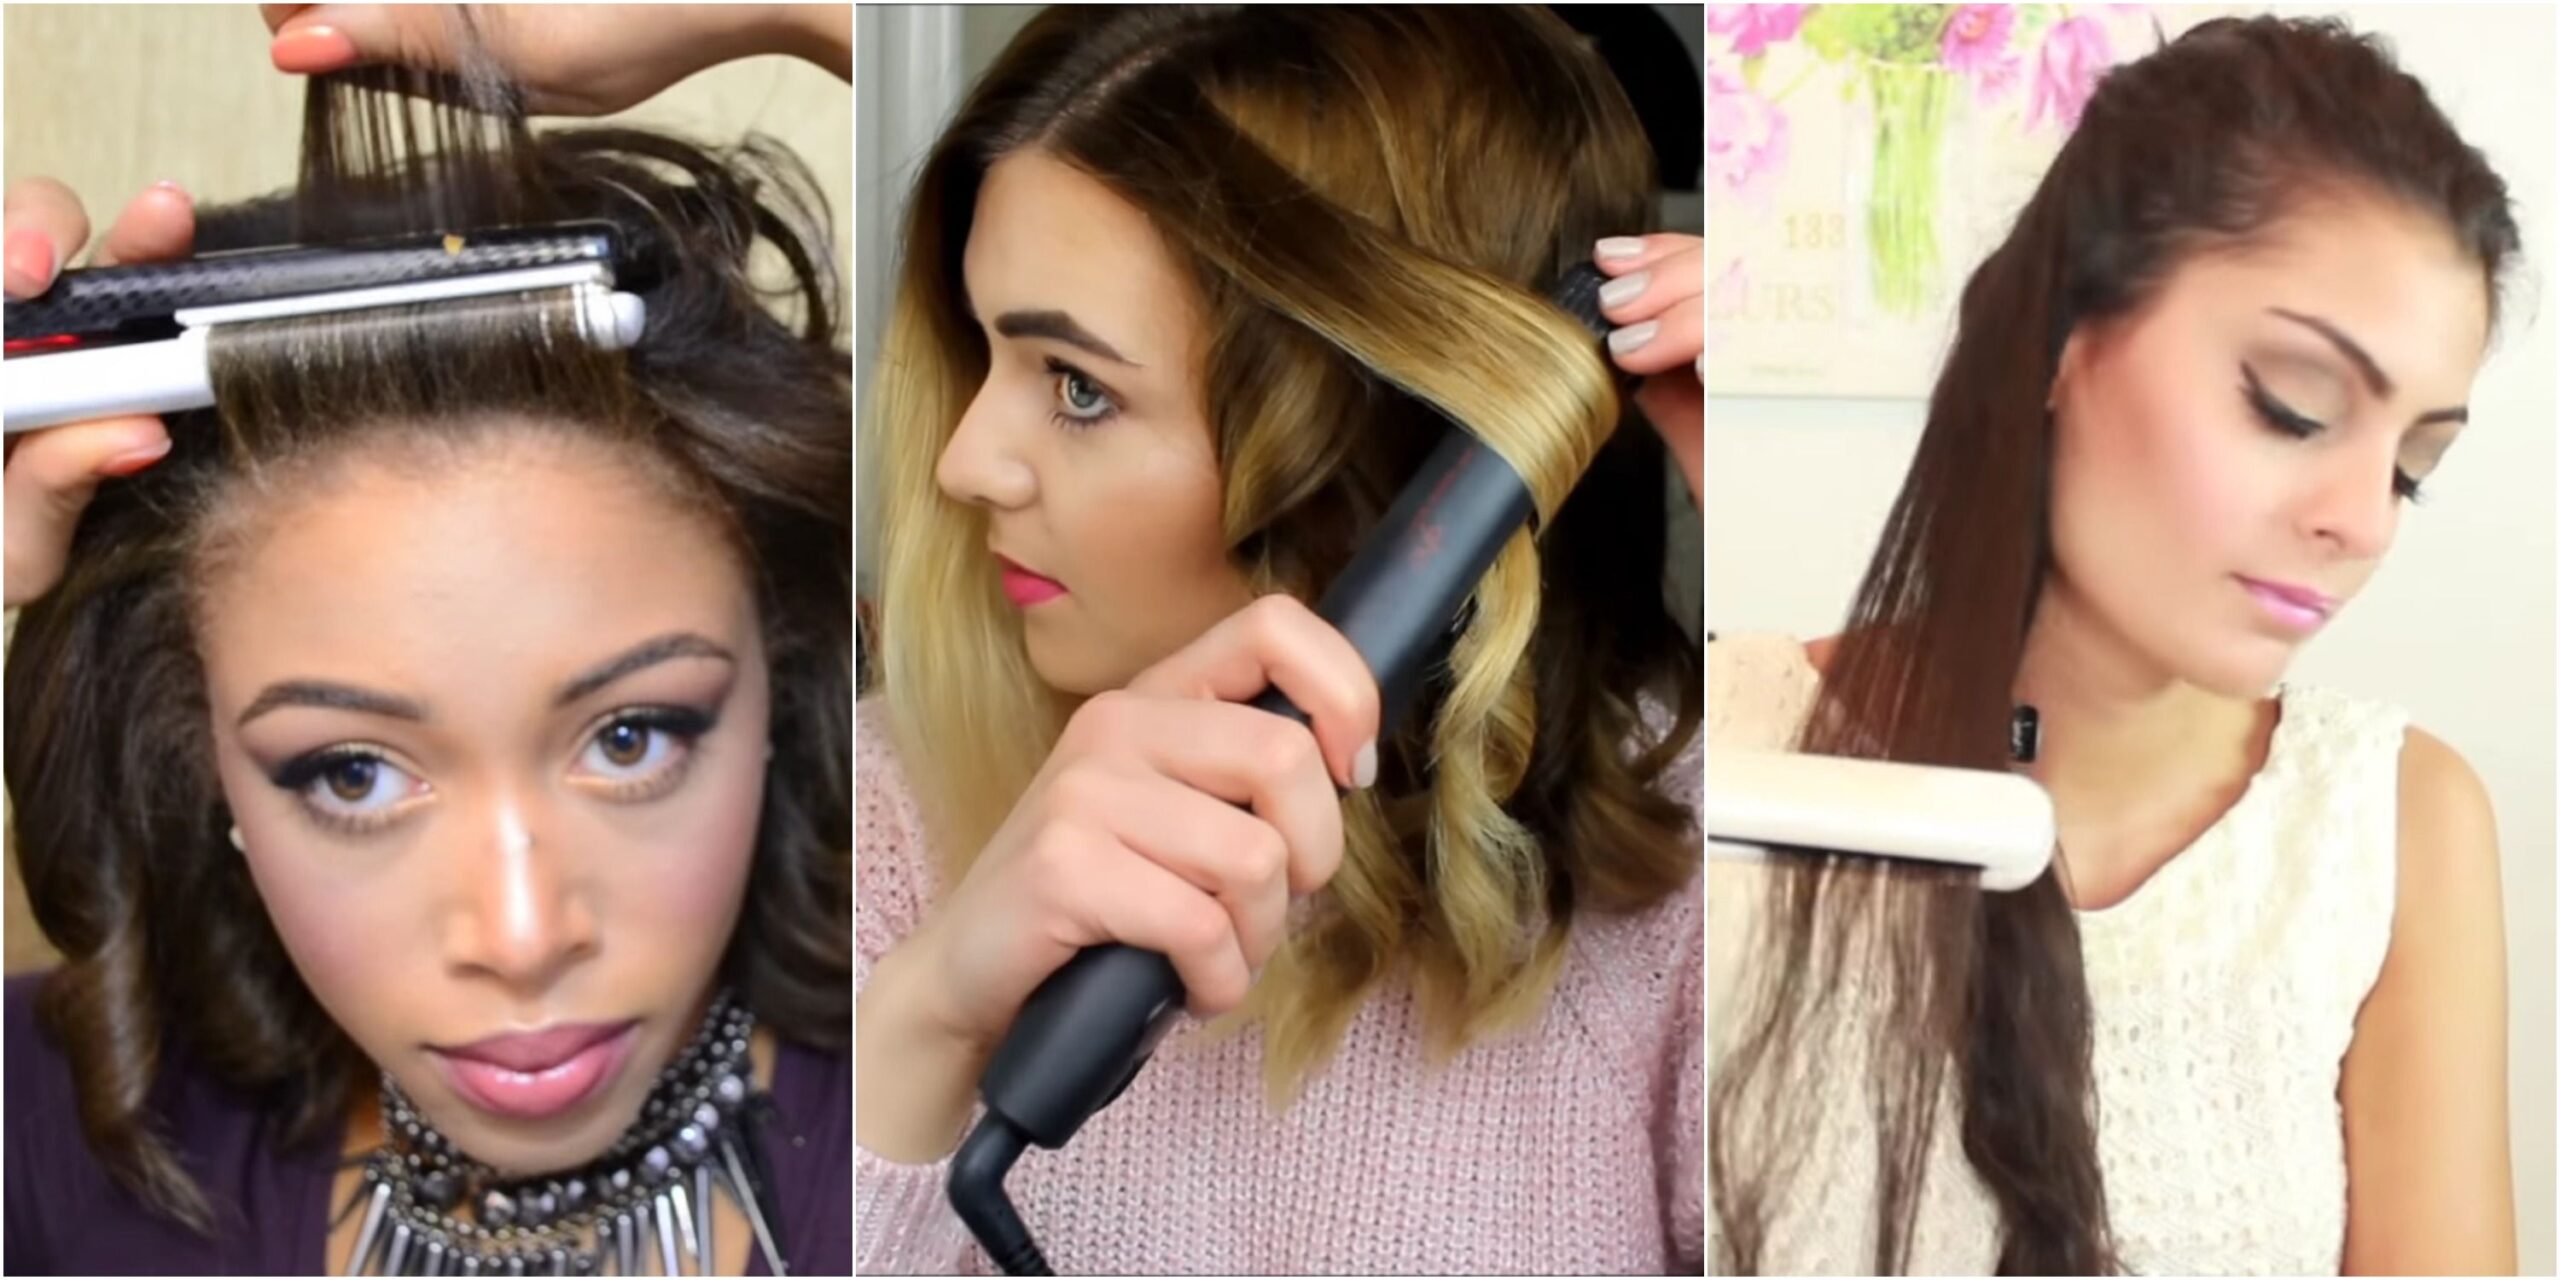 7 Things to Look For in a Cheap Flat Iron